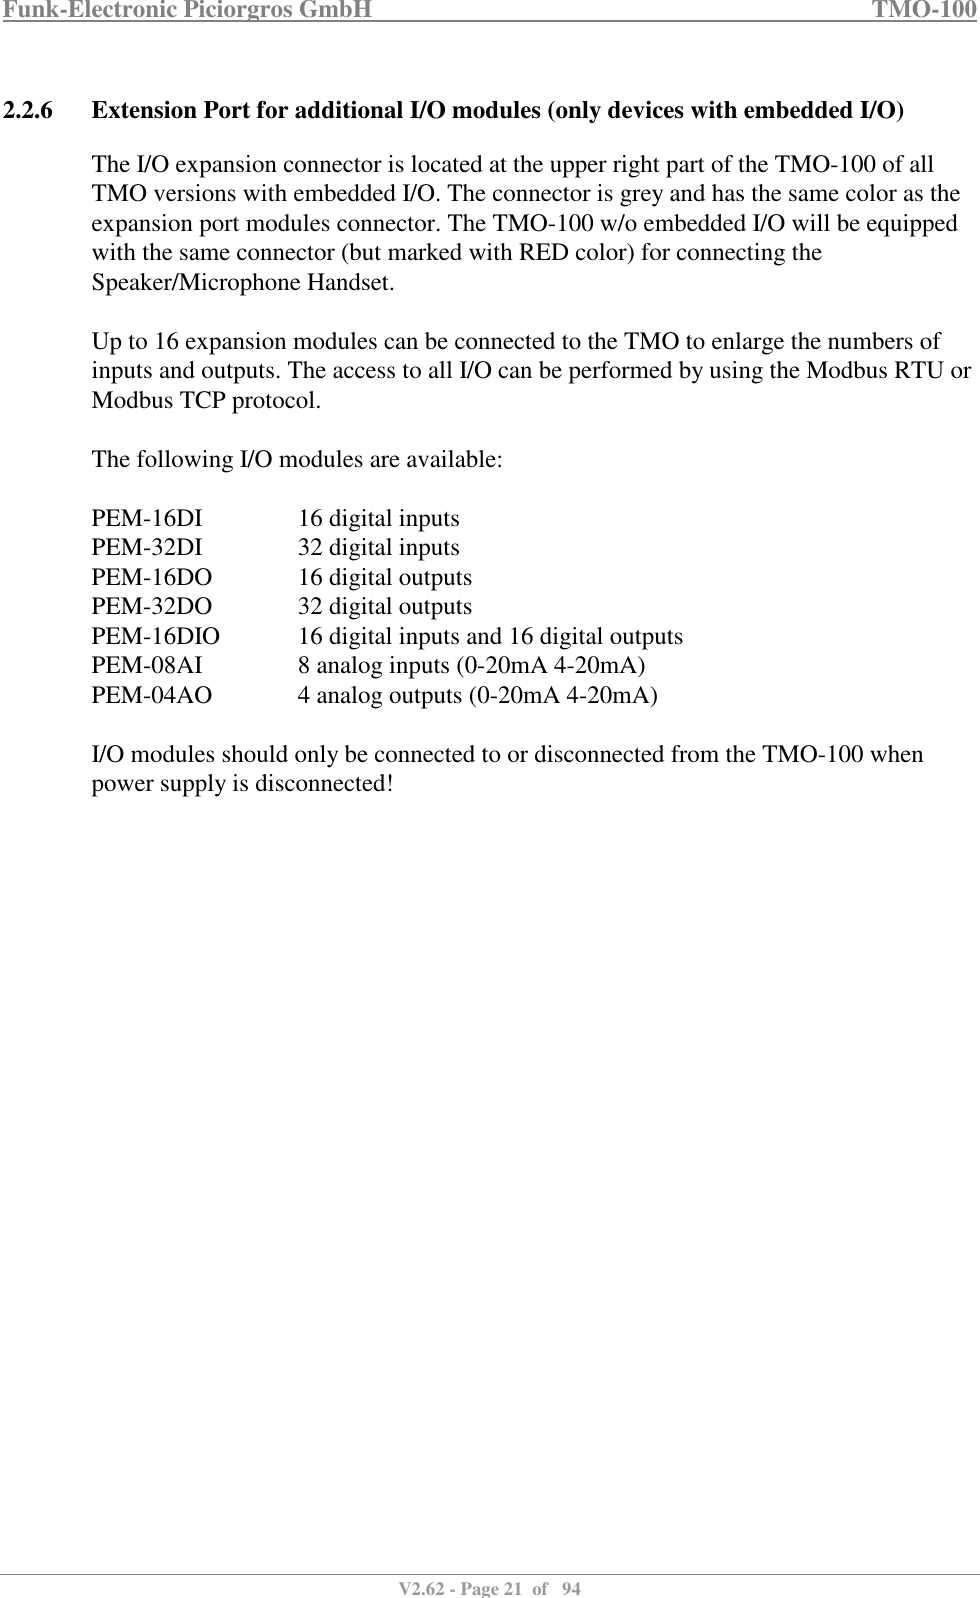 Funk-Electronic Piciorgros GmbH   TMO-100   V2.62 - Page 21  of   94   2.2.6 Extension Port for additional I/O modules (only devices with embedded I/O) The I/O expansion connector is located at the upper right part of the TMO-100 of all TMO versions with embedded I/O. The connector is grey and has the same color as the expansion port modules connector. The TMO-100 w/o embedded I/O will be equipped with the same connector (but marked with RED color) for connecting the Speaker/Microphone Handset.  Up to 16 expansion modules can be connected to the TMO to enlarge the numbers of inputs and outputs. The access to all I/O can be performed by using the Modbus RTU or Modbus TCP protocol.  The following I/O modules are available:  PEM-16DI    16 digital inputs PEM-32DI    32 digital inputs PEM-16DO    16 digital outputs PEM-32DO    32 digital outputs PEM-16DIO   16 digital inputs and 16 digital outputs PEM-08AI    8 analog inputs (0-20mA 4-20mA) PEM-04AO    4 analog outputs (0-20mA 4-20mA)  I/O modules should only be connected to or disconnected from the TMO-100 when power supply is disconnected!  